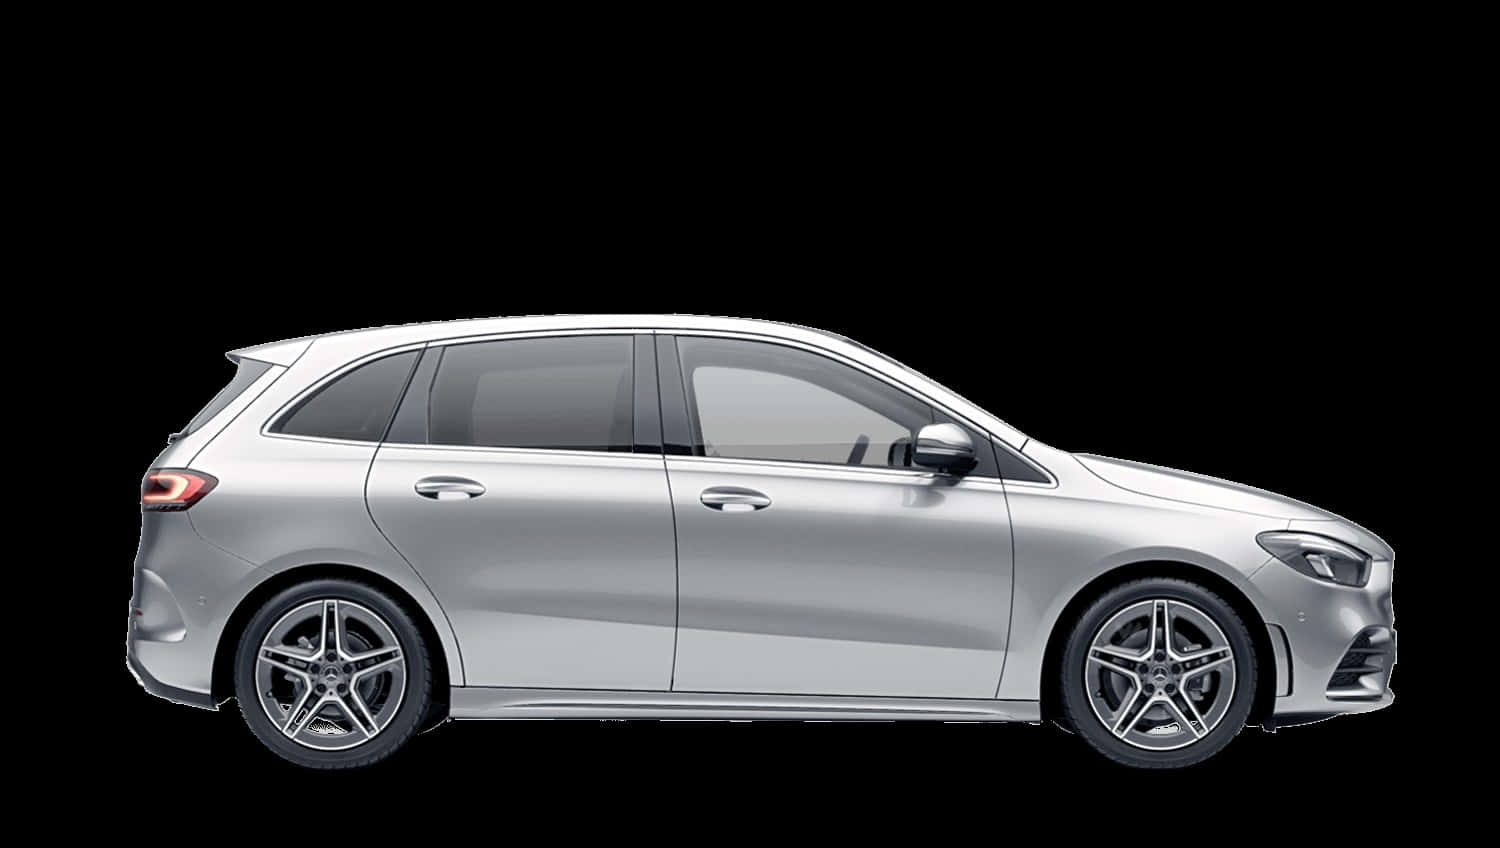 Sleek and stylish Mercedes Benz B-class on the road Wallpaper